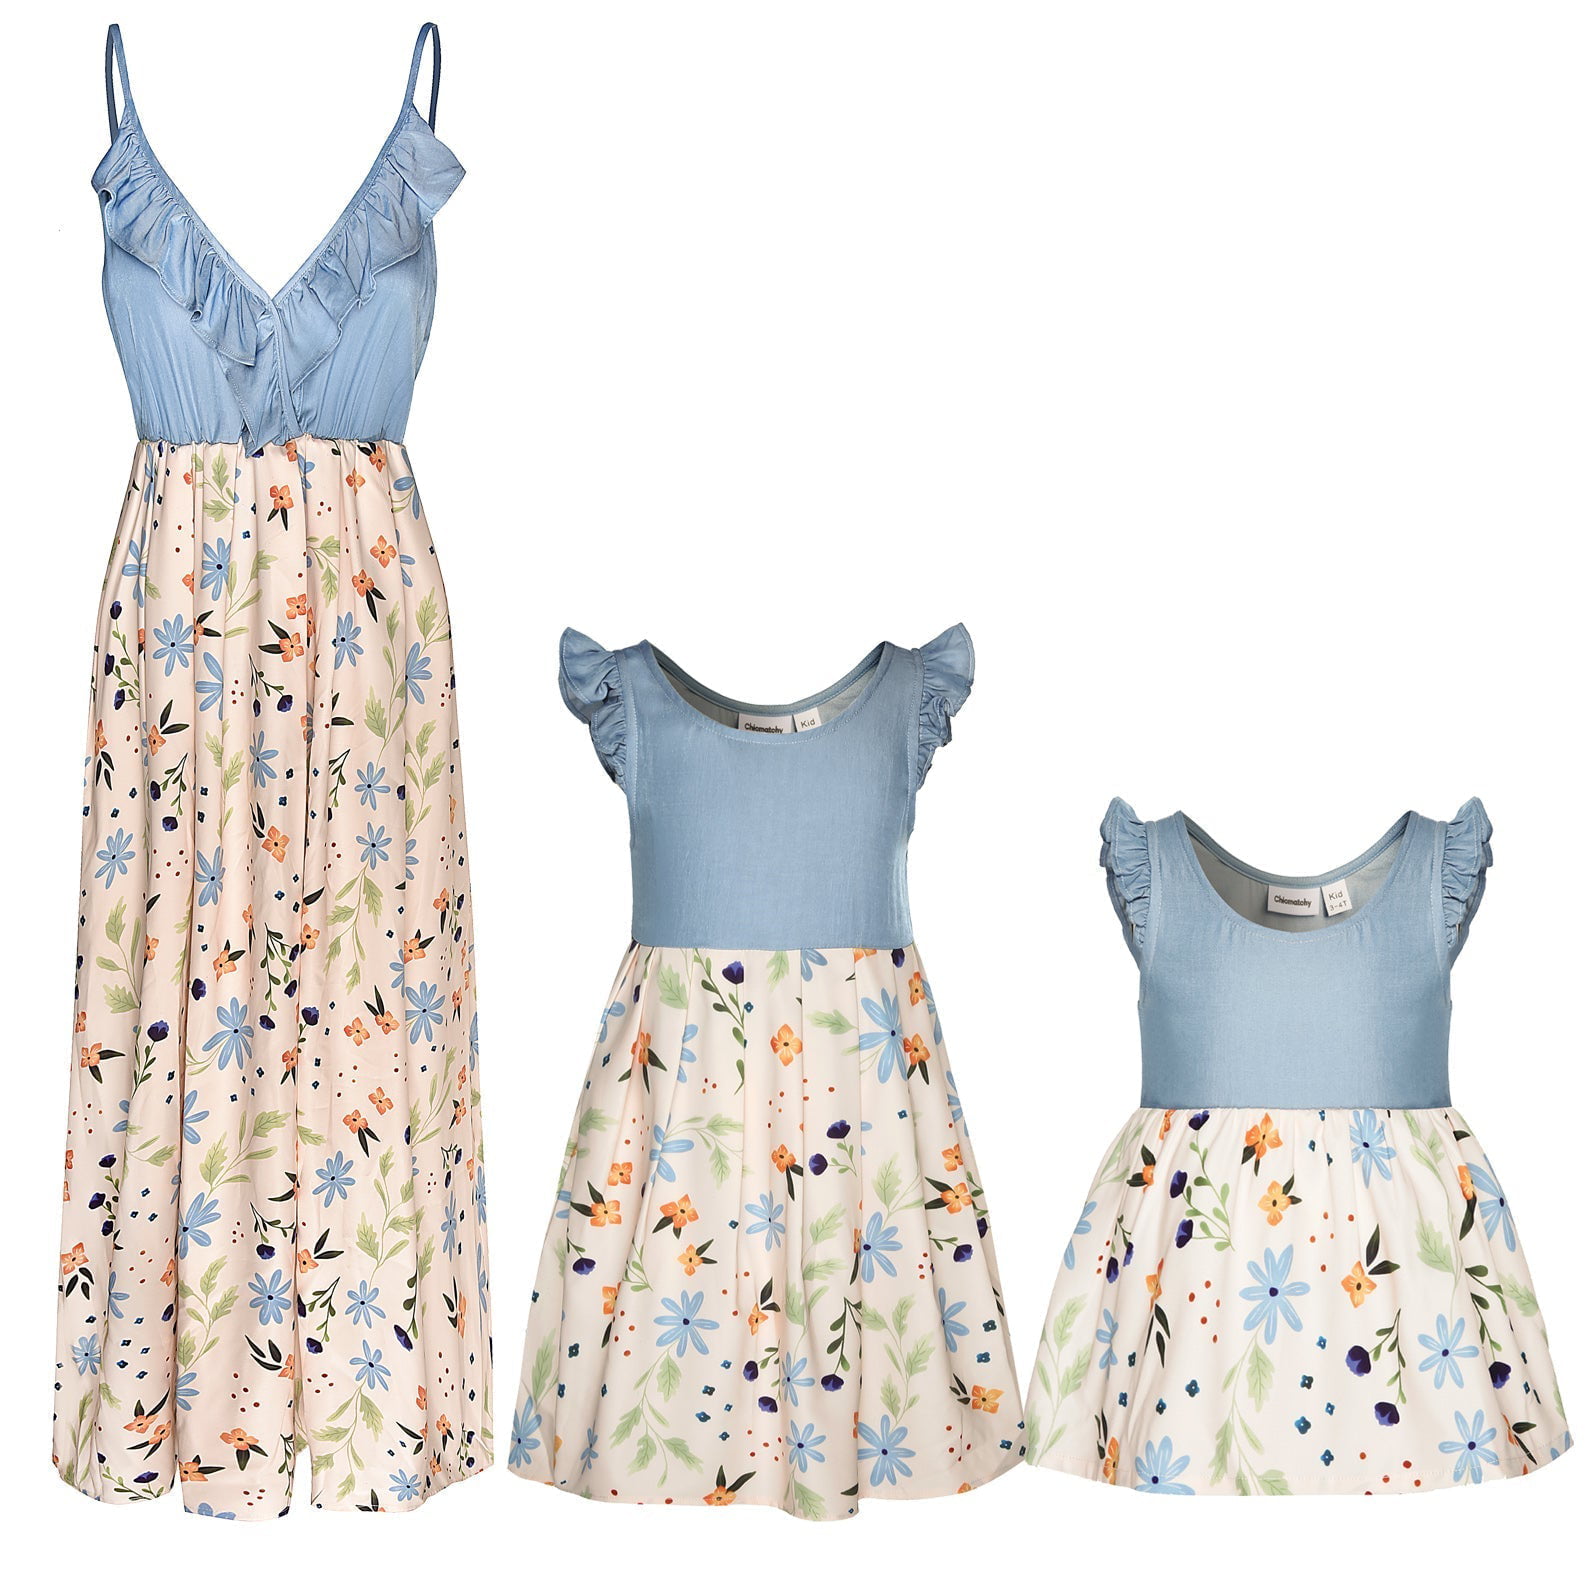 Floral Print Matching Maxi Family Dresses for Mom and Me - Walmart.com